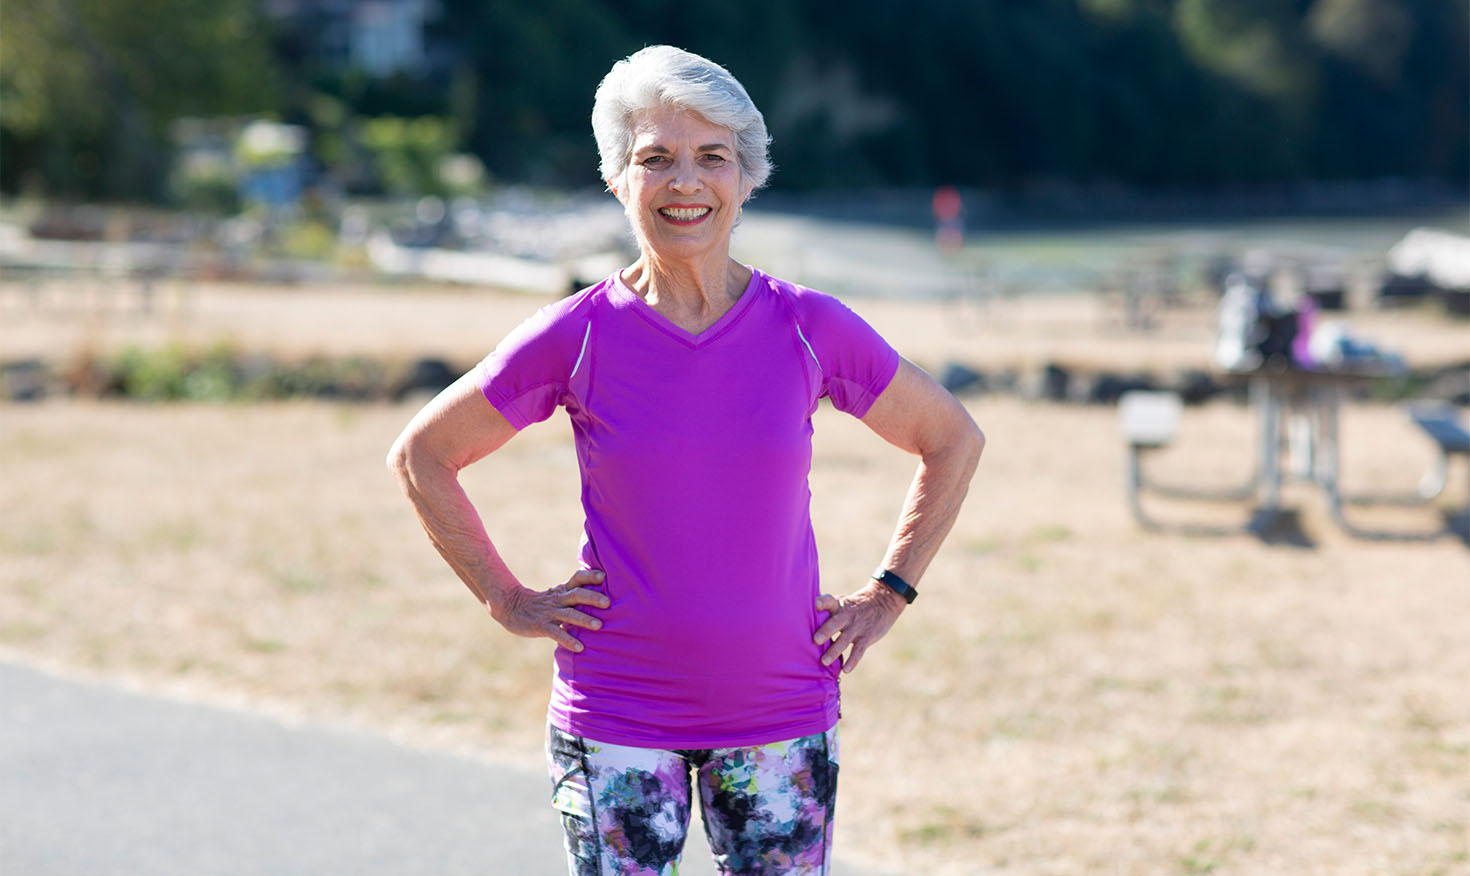 Smiling senior woman in workout clothes standing outside with her hands on her hips